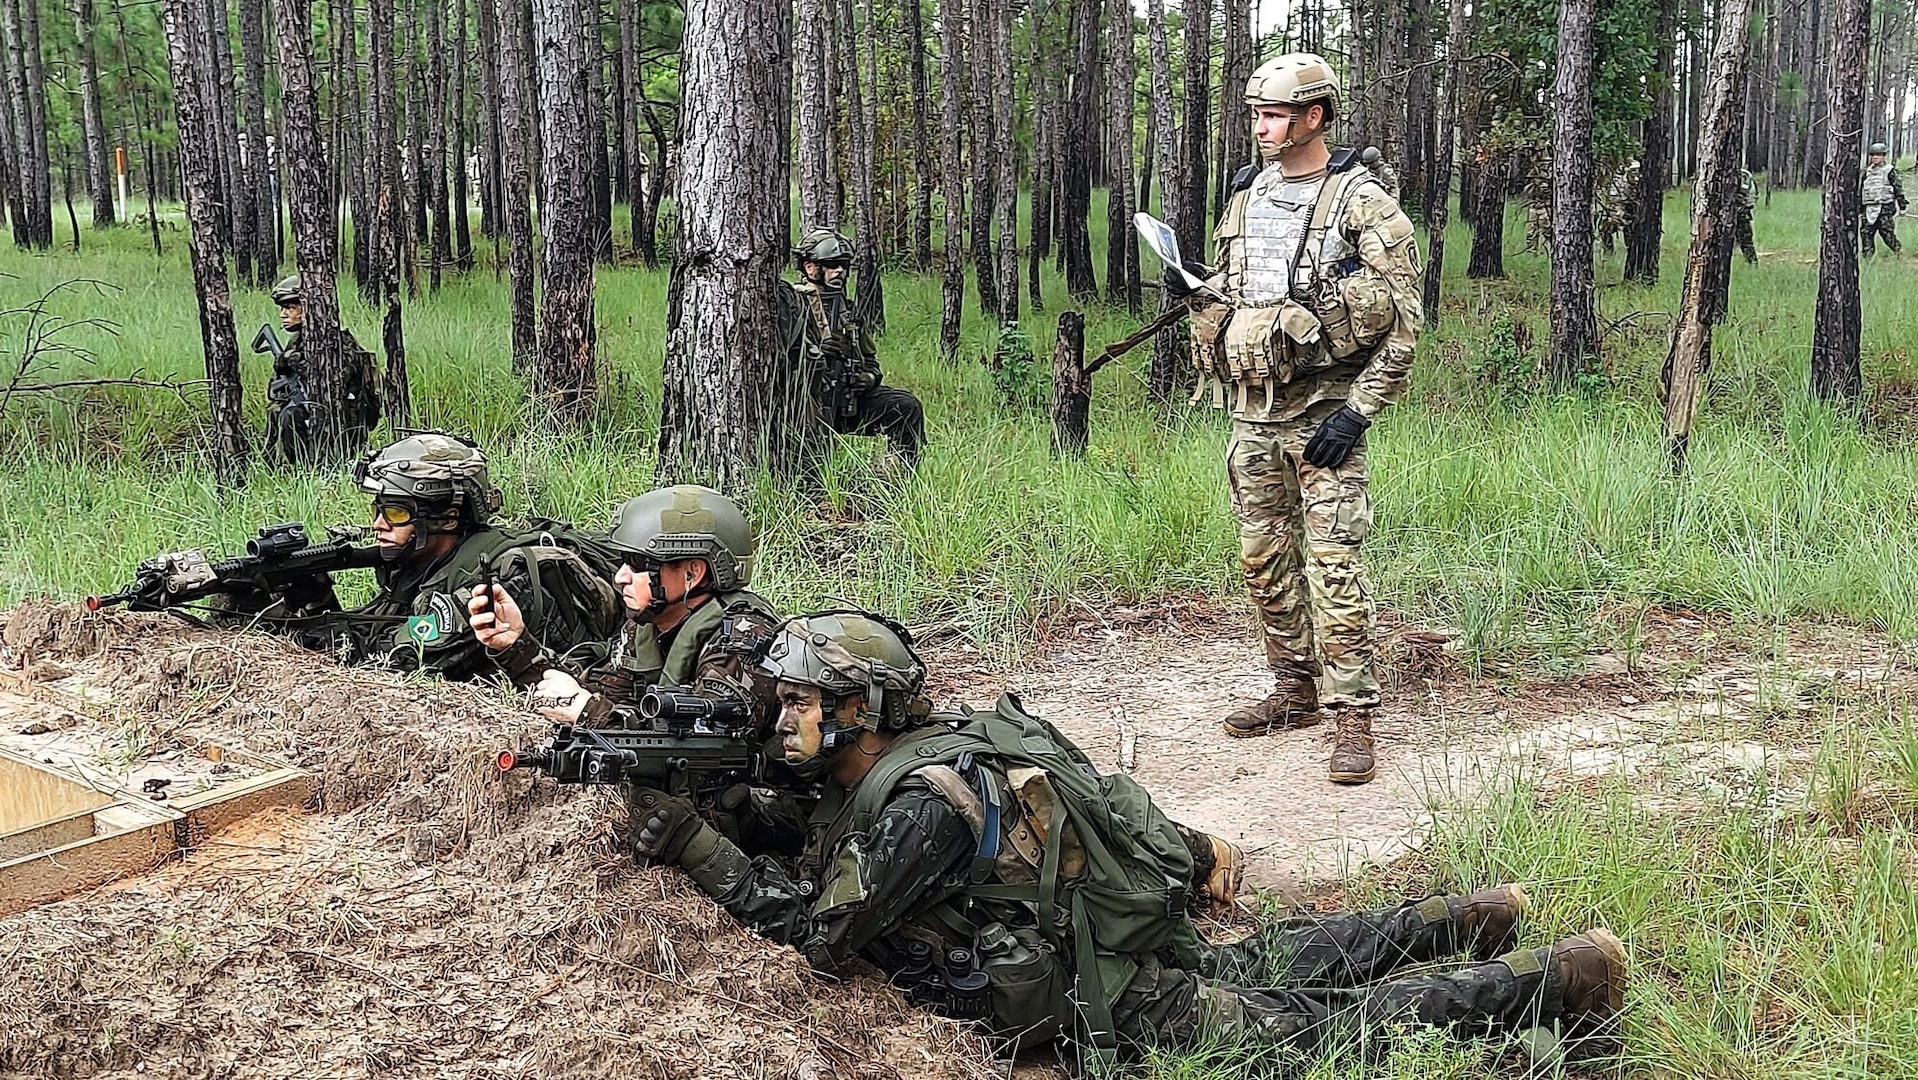 bilateral training exercise at the Joint Readiness Training Center at Fort Polk